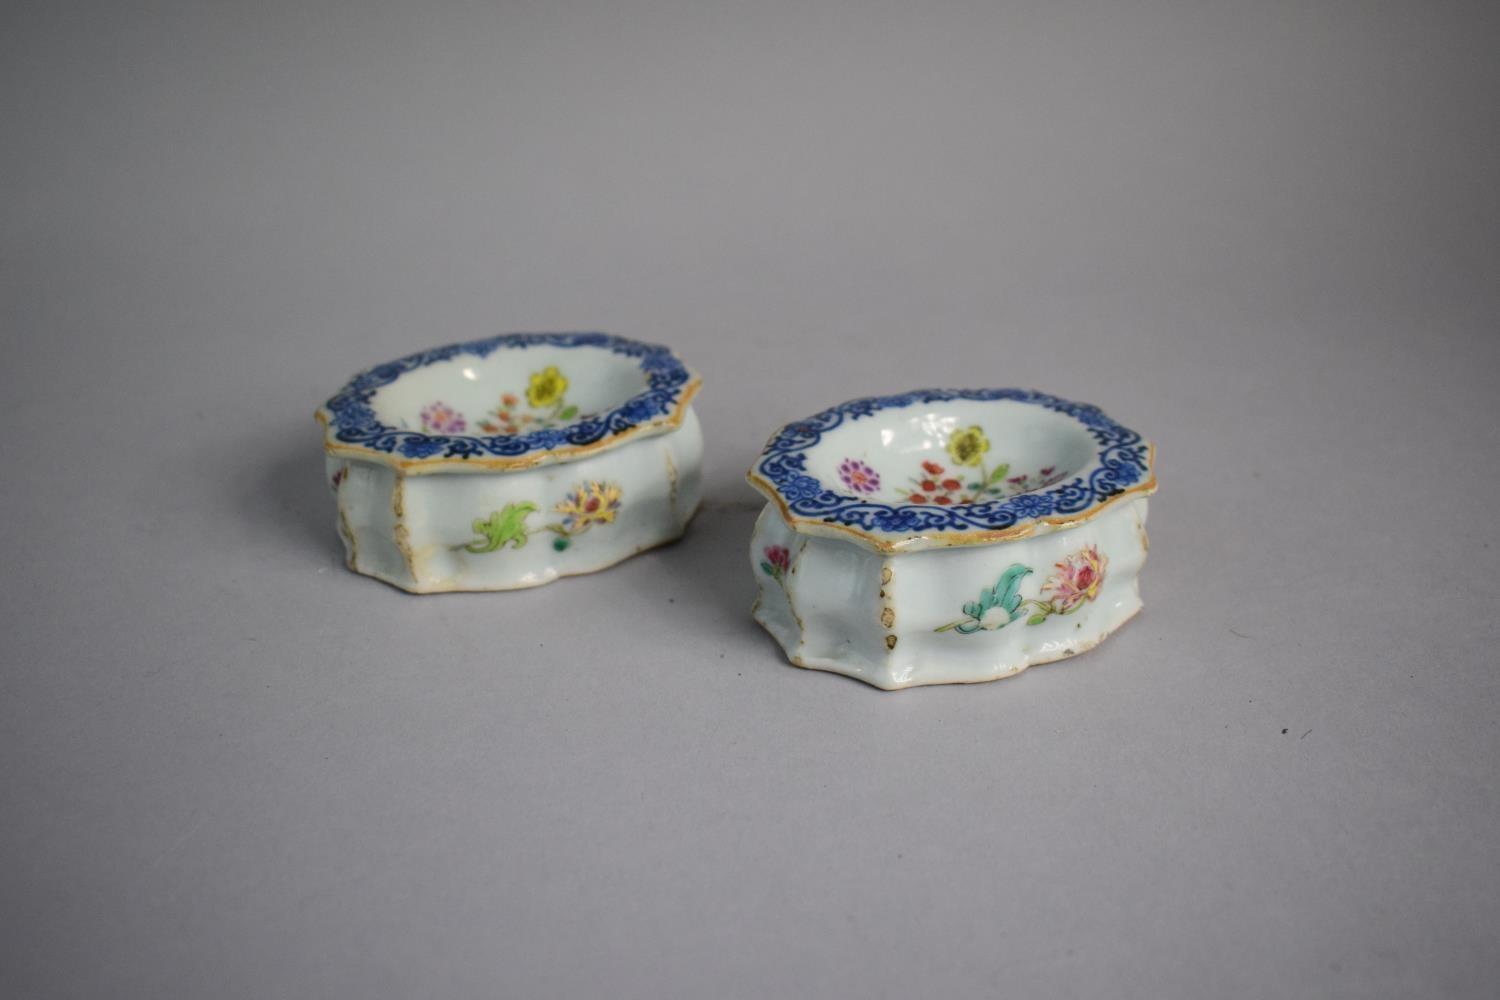 A Pair of Early Chinese Glazed Stoneware Salts decorated with Flowers and Blue and White Border.